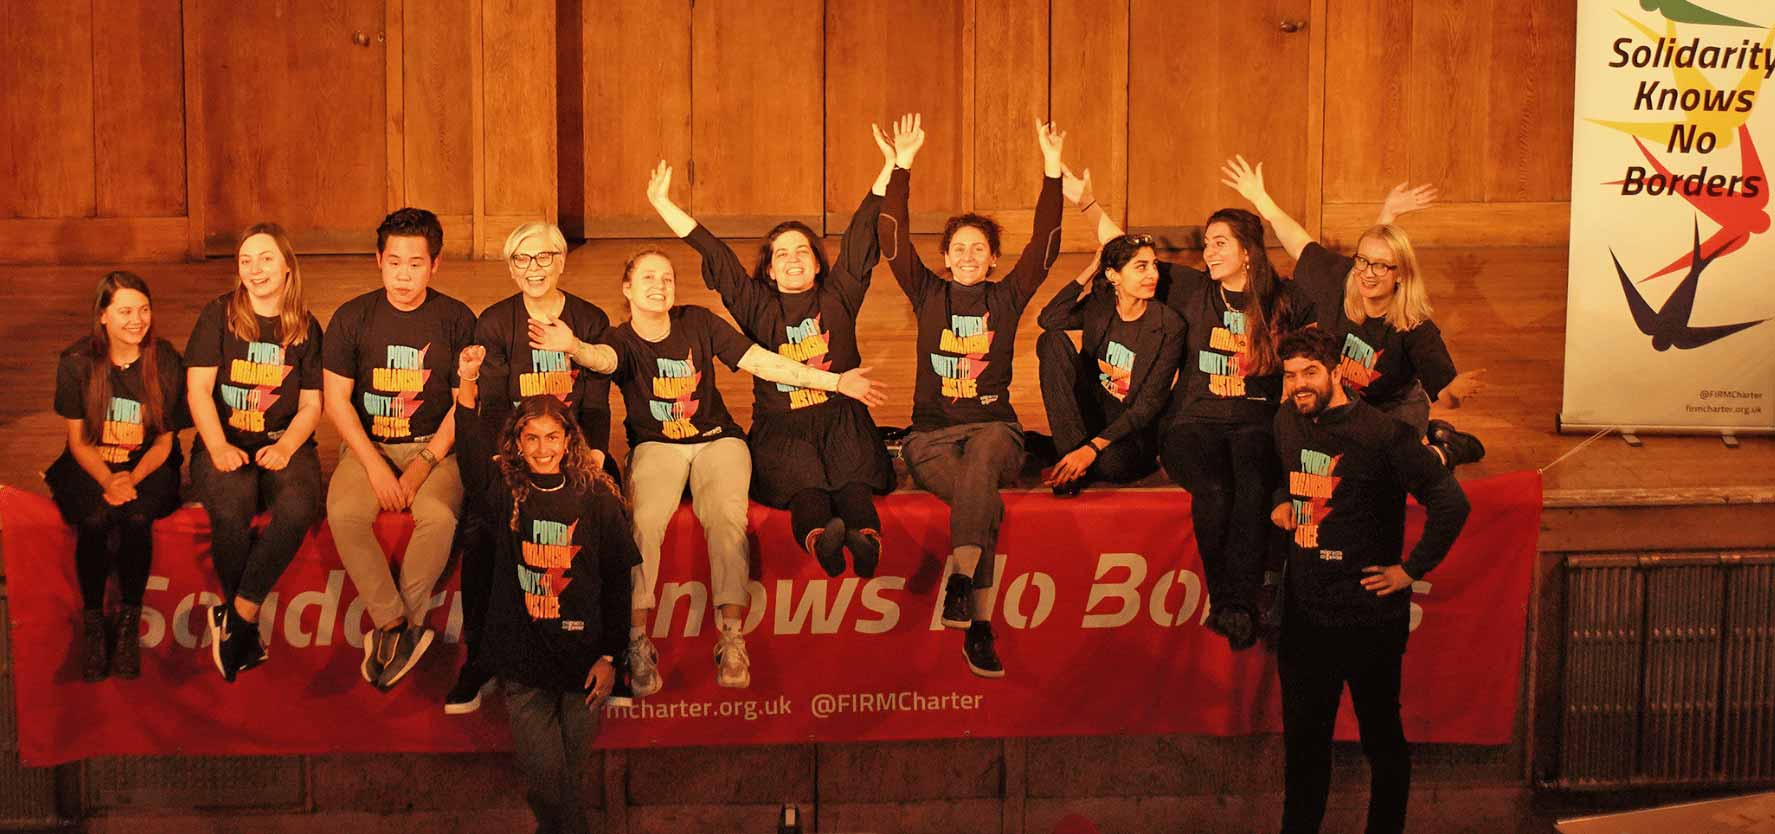 Twelve members of the Migrants Organise team are pictured on a stage with a banner reading 'solidarity knows no borders'. Picture: Migrants Organise